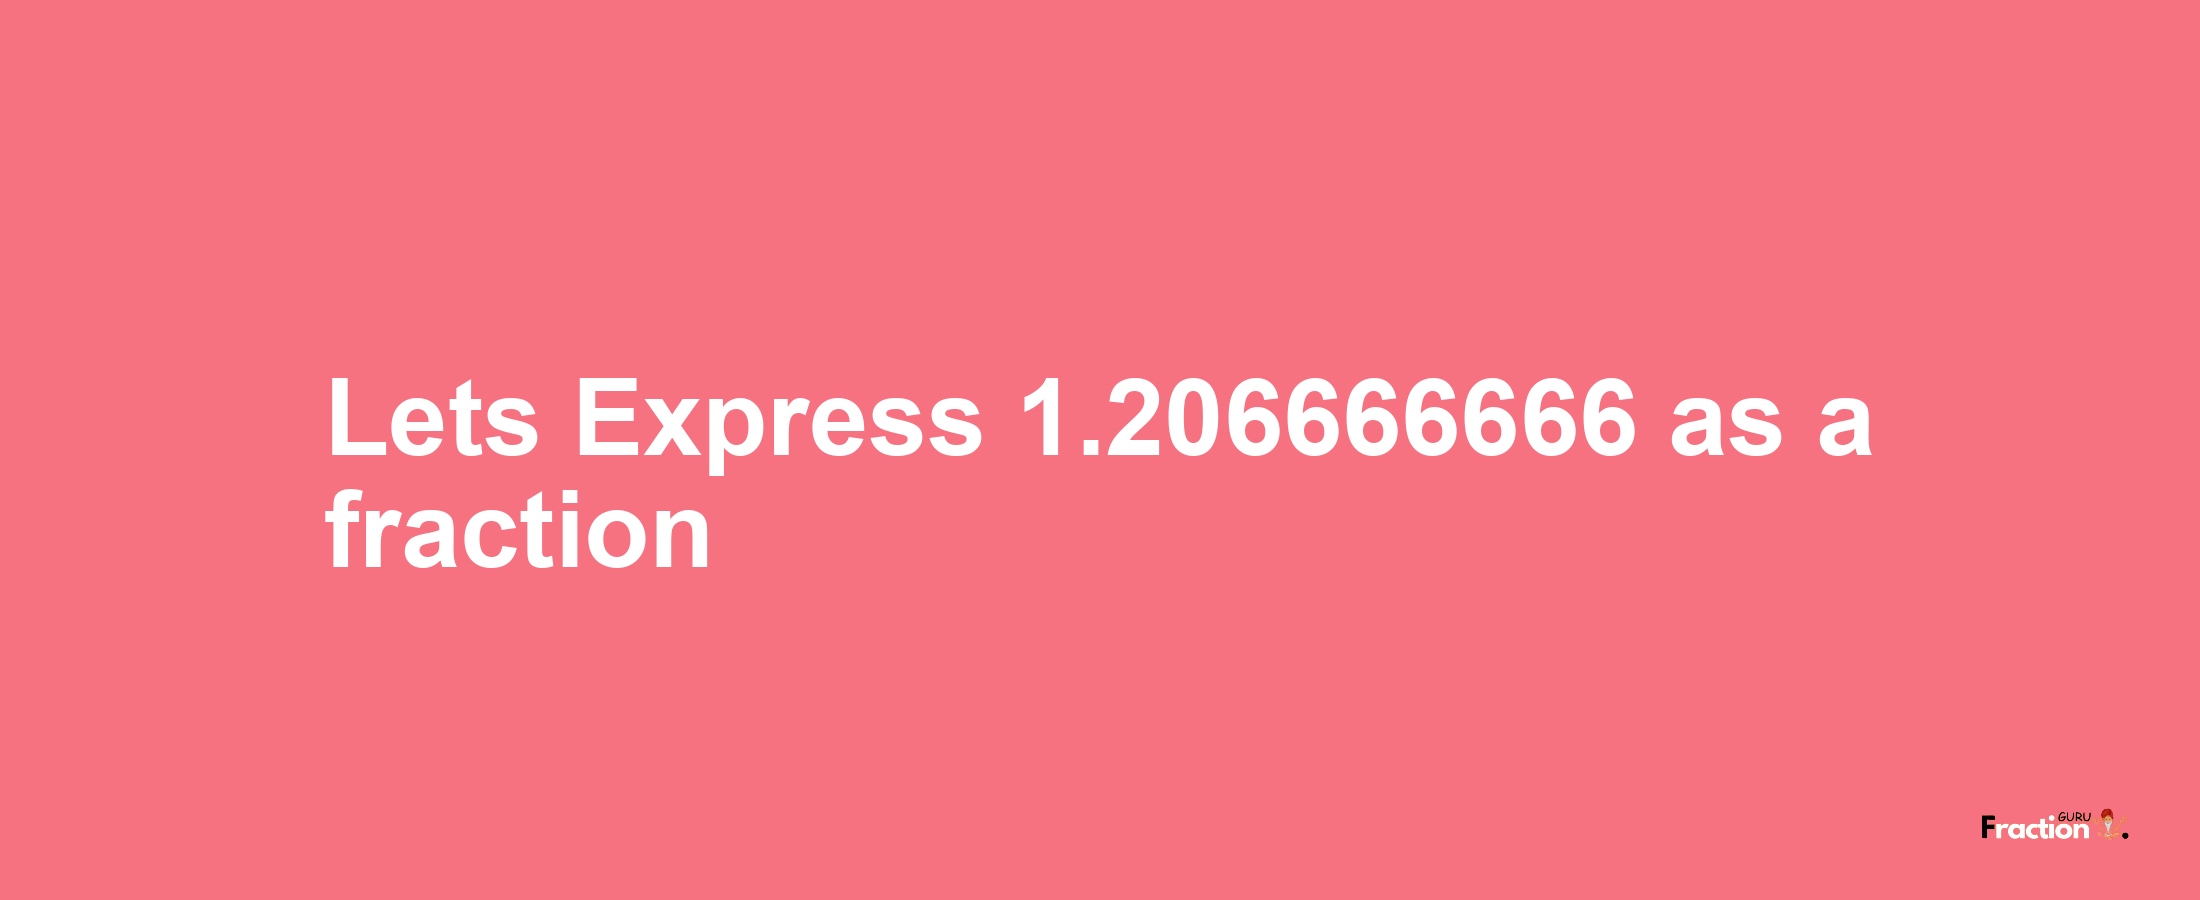 Lets Express 1.206666666 as afraction